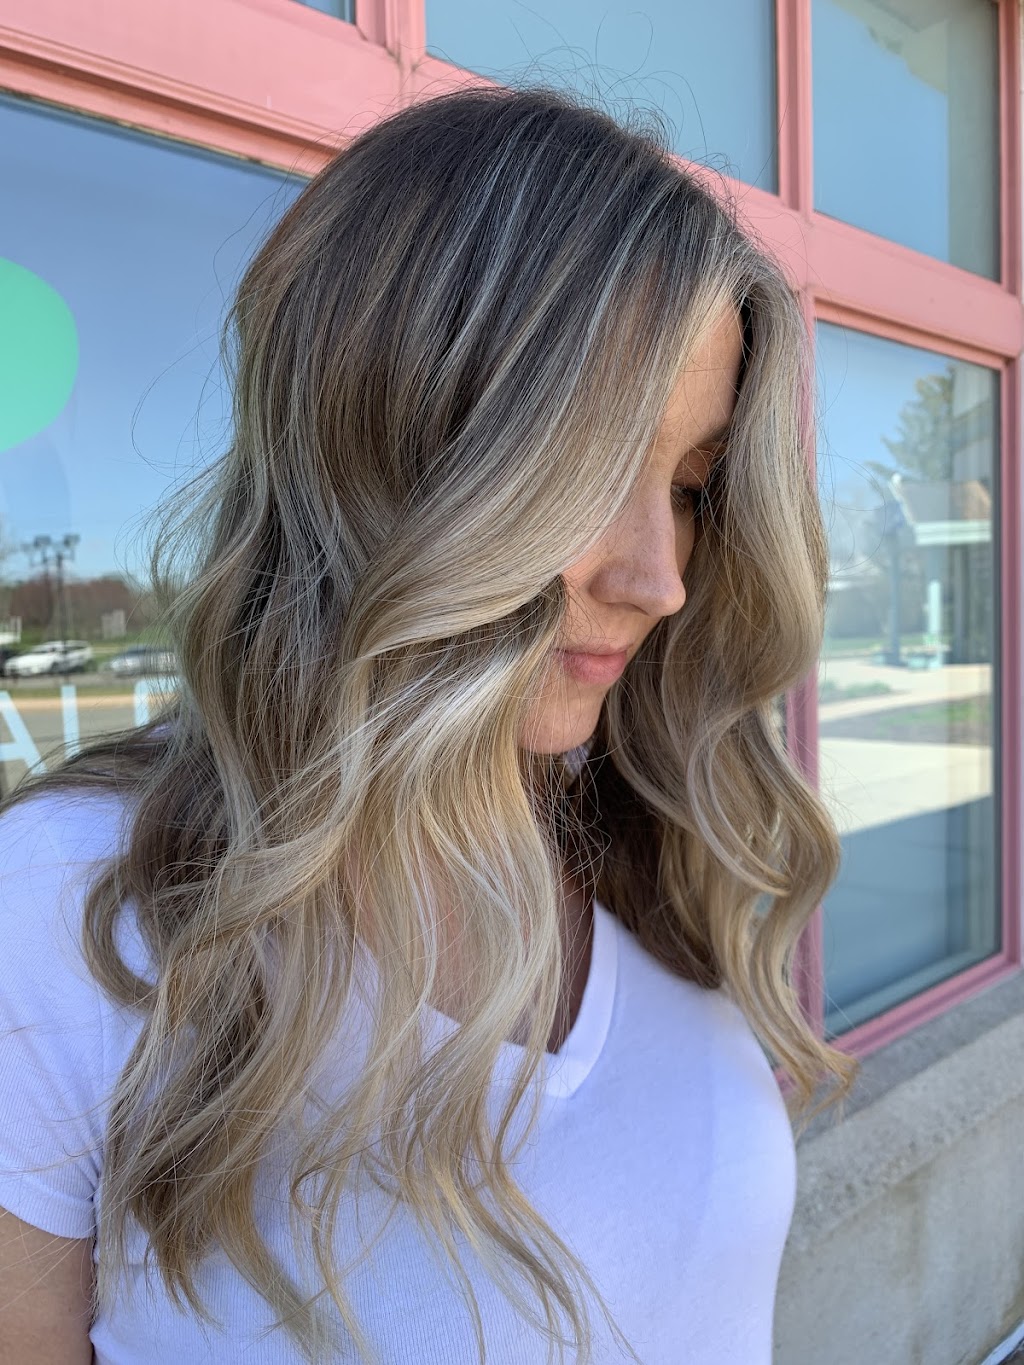 Styled by Sabrina | 555 Day Hill Rd, Windsor, CT 06095 | Phone: (860) 602-8530